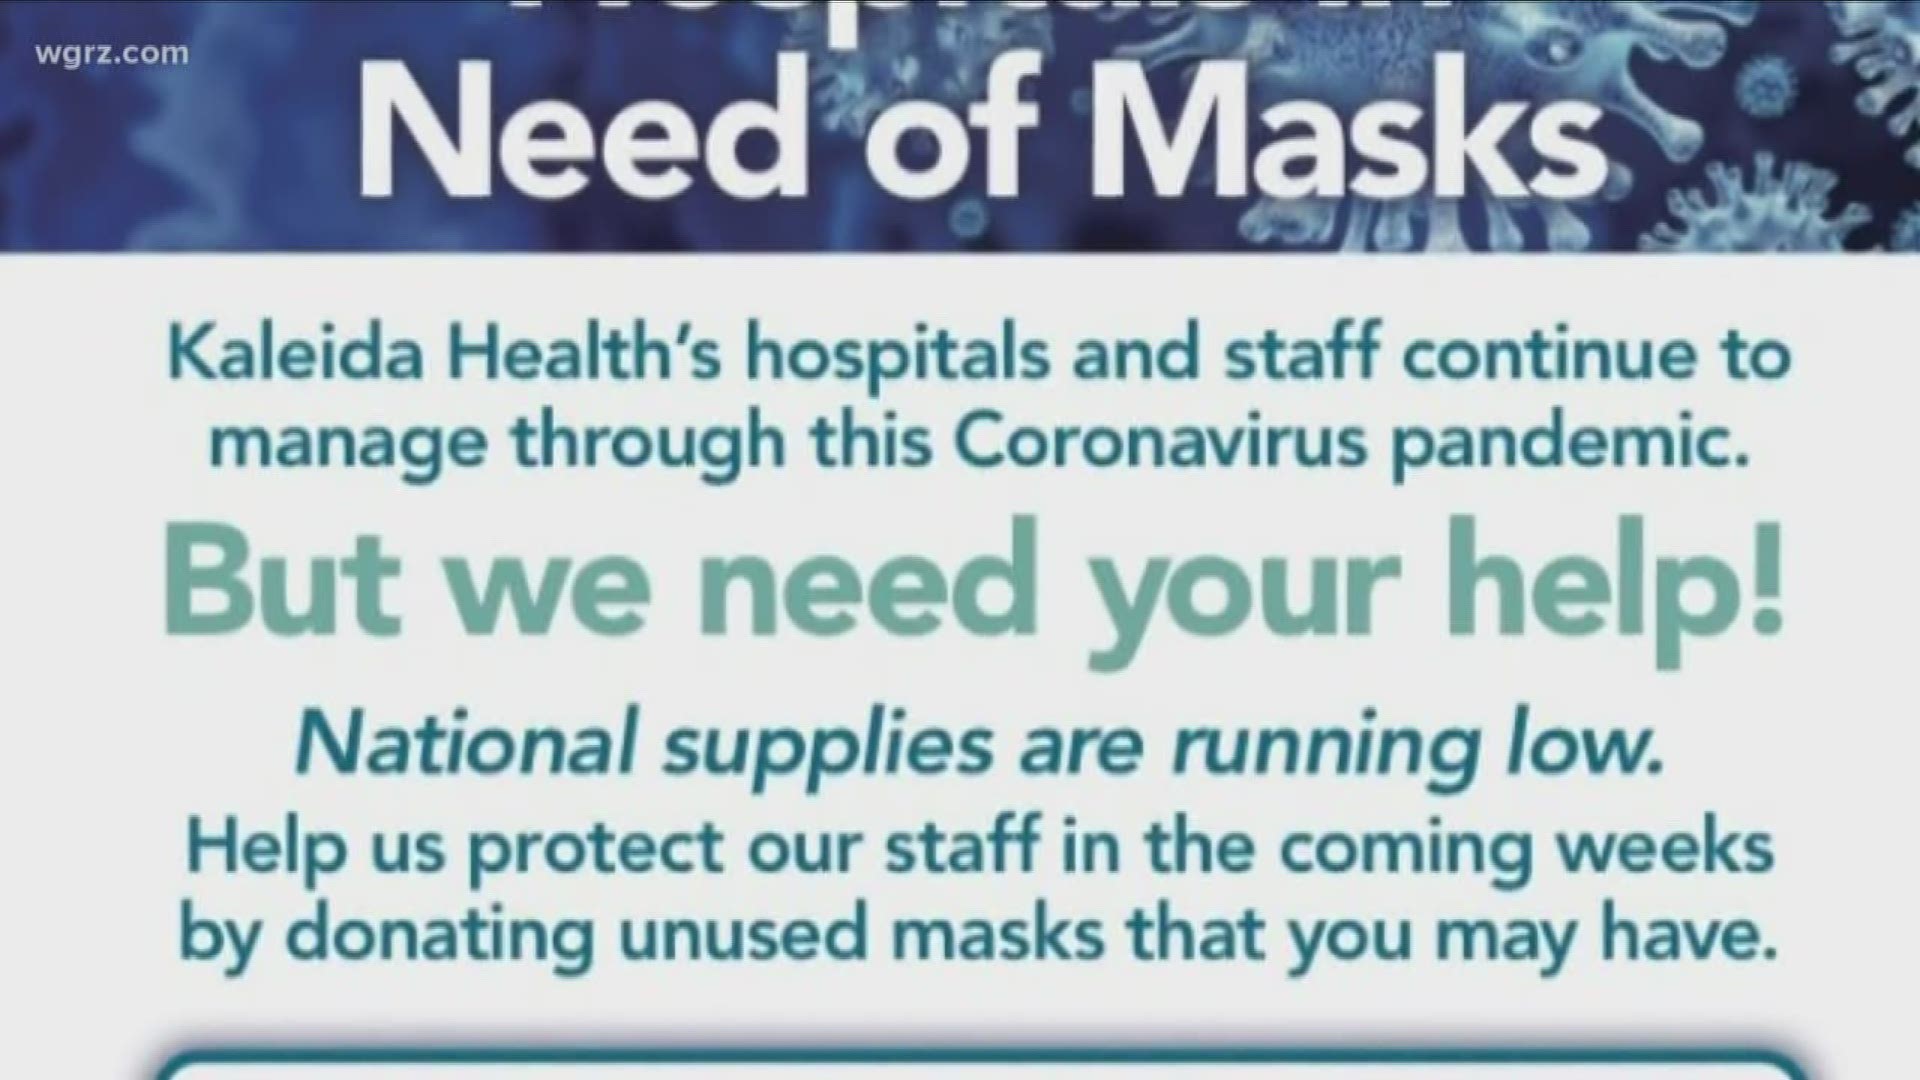 The hospital says they have two or three weeks of supplies available at the moment, but they need masks.